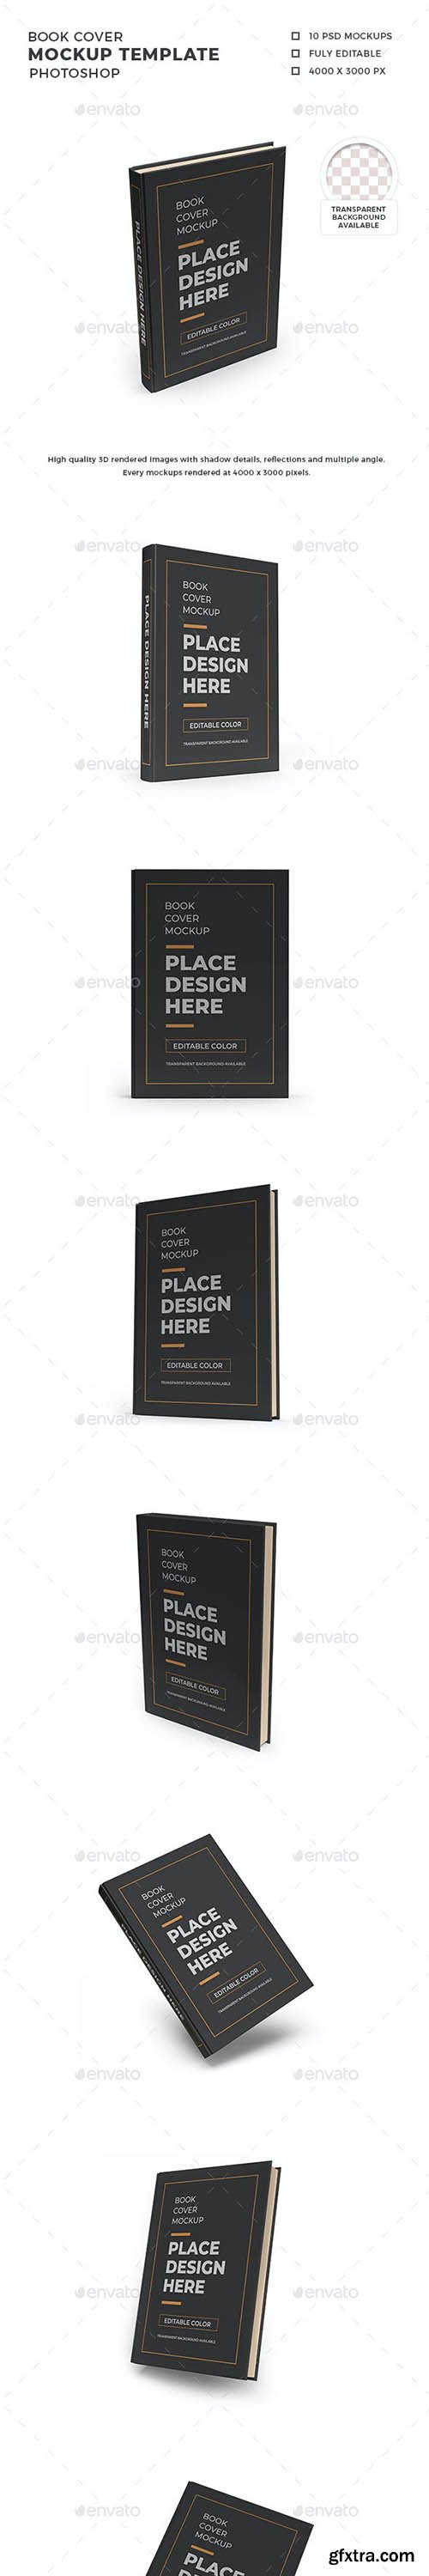 GraphicRiver - Book Cover 3D Mockup Template 30816700